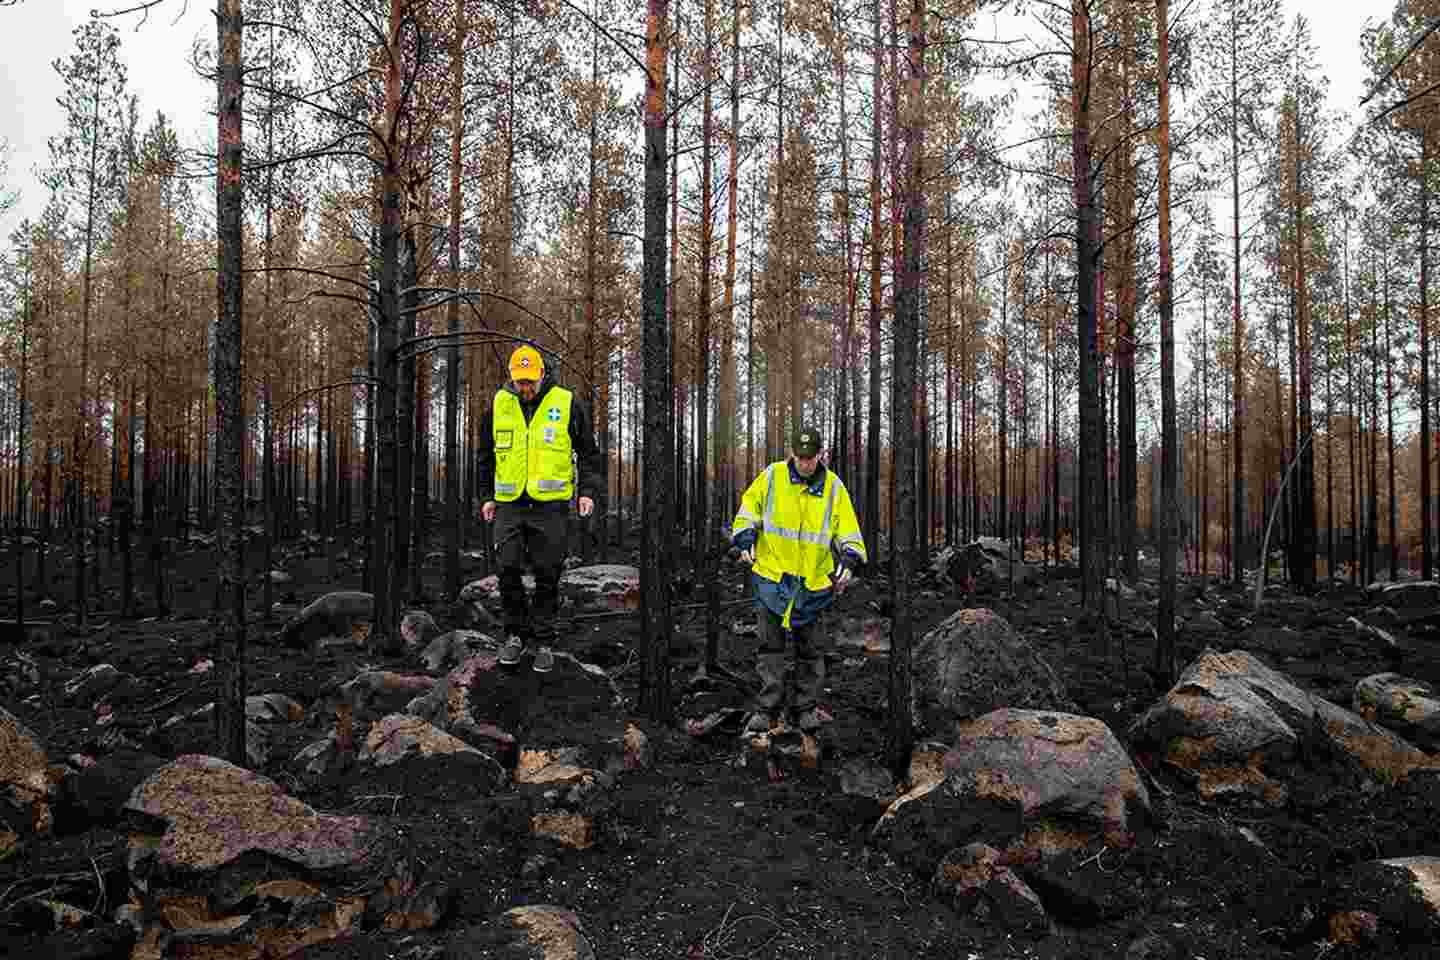 Two Voluntary Rescue Service volunteers wearing yellow vests walking in a badly burned forest.